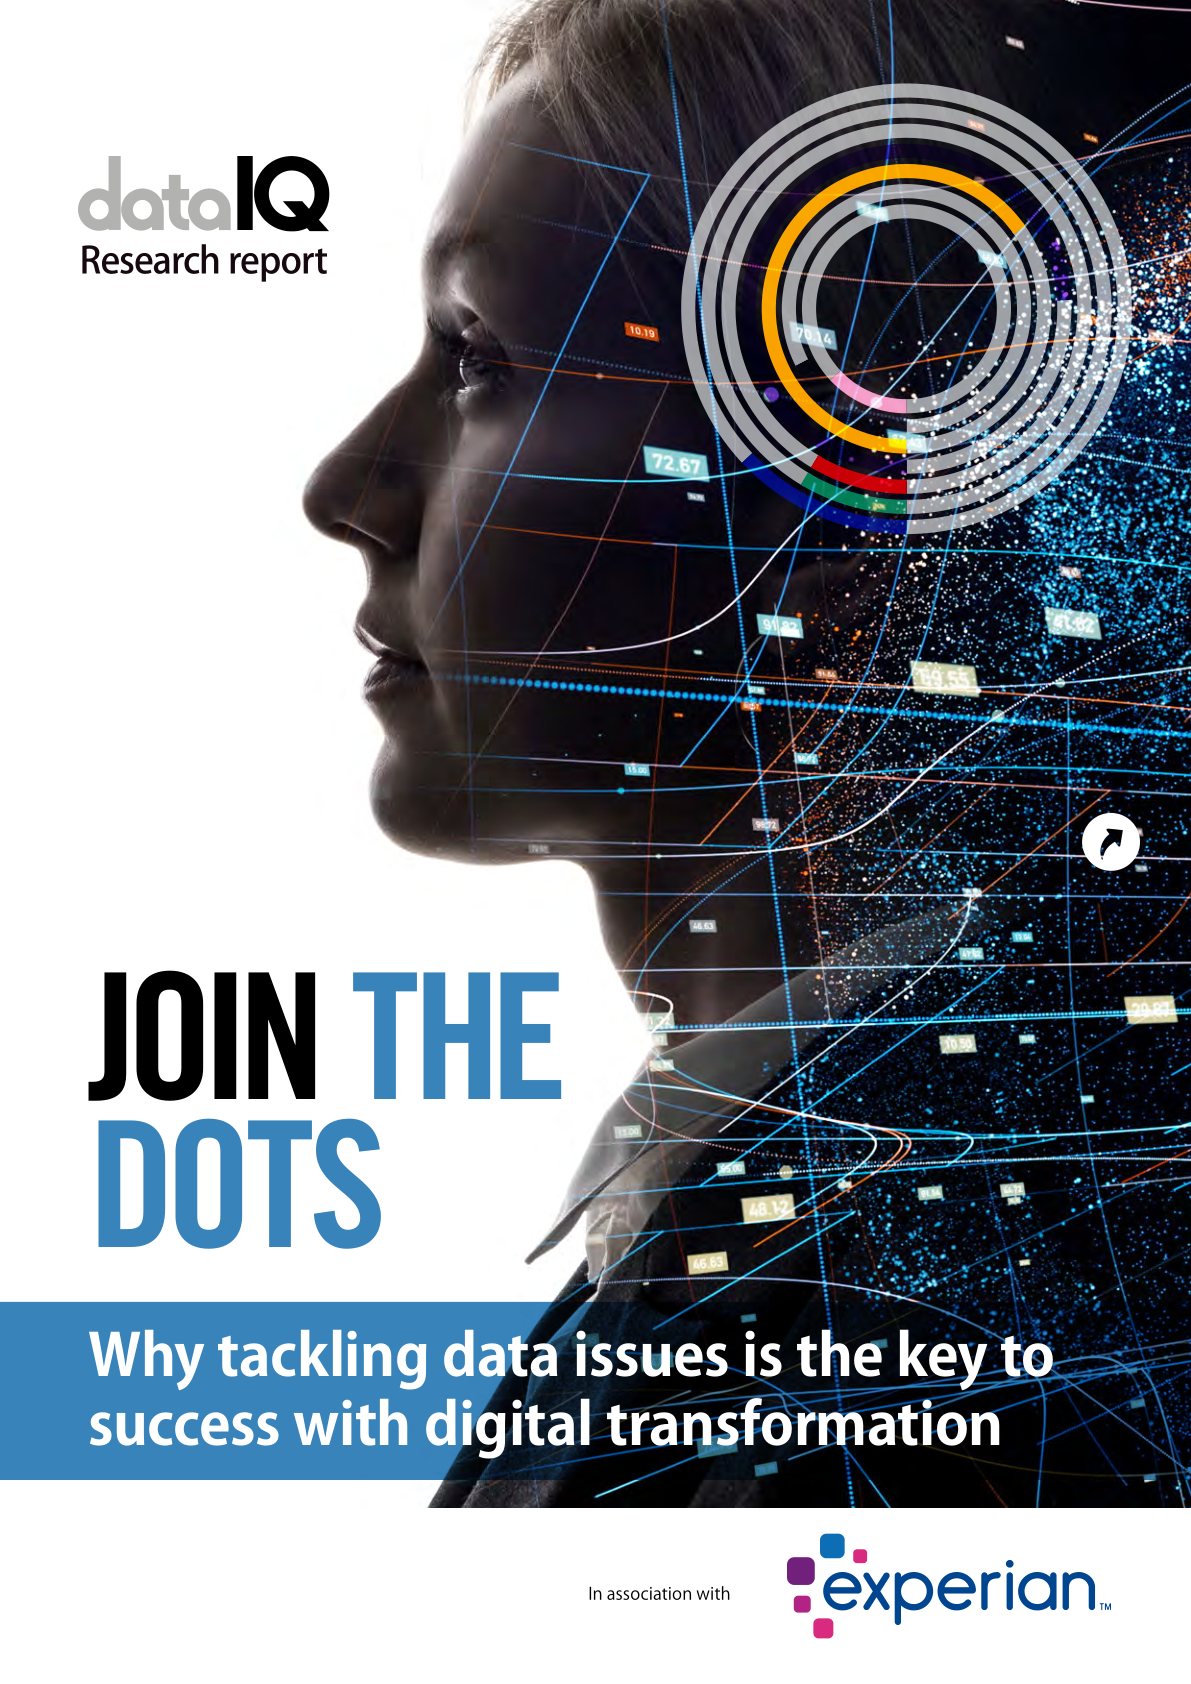 Join the dots: Why tackling data issues is key to digital transformation